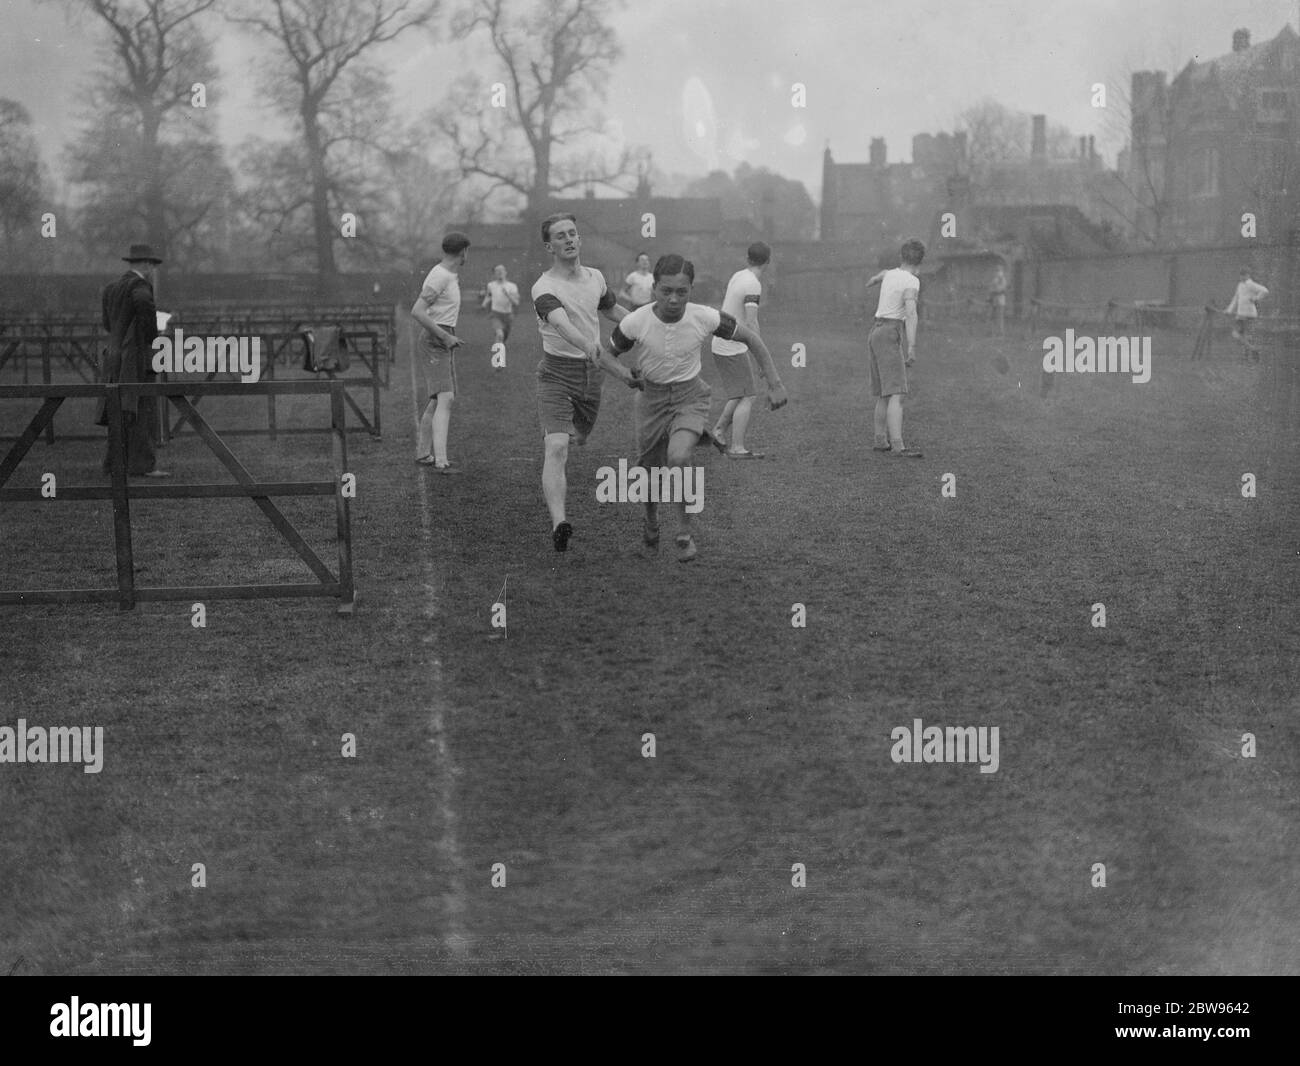 Prince Birabongse changes over in relay at Eton College sports . Prince Birabongse taking over from G Cox in the Inter House relay of the Eton College Sports final at Windsor . 22 March 1932 Stock Photo